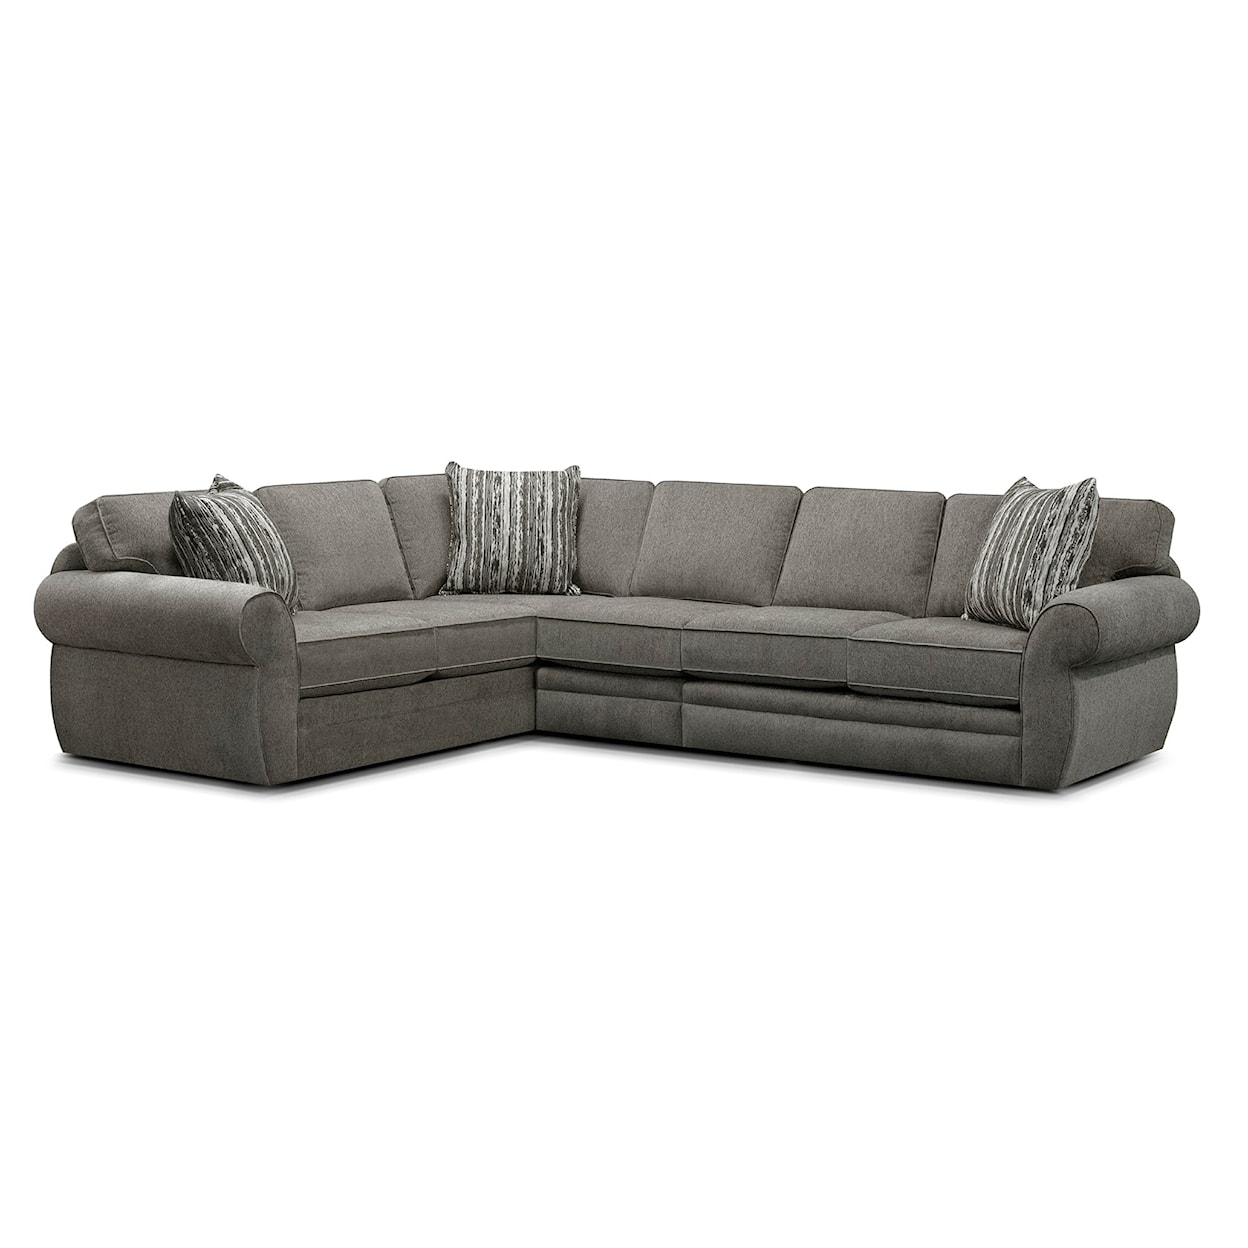 England 5S00 Series 3-Piece Sectional